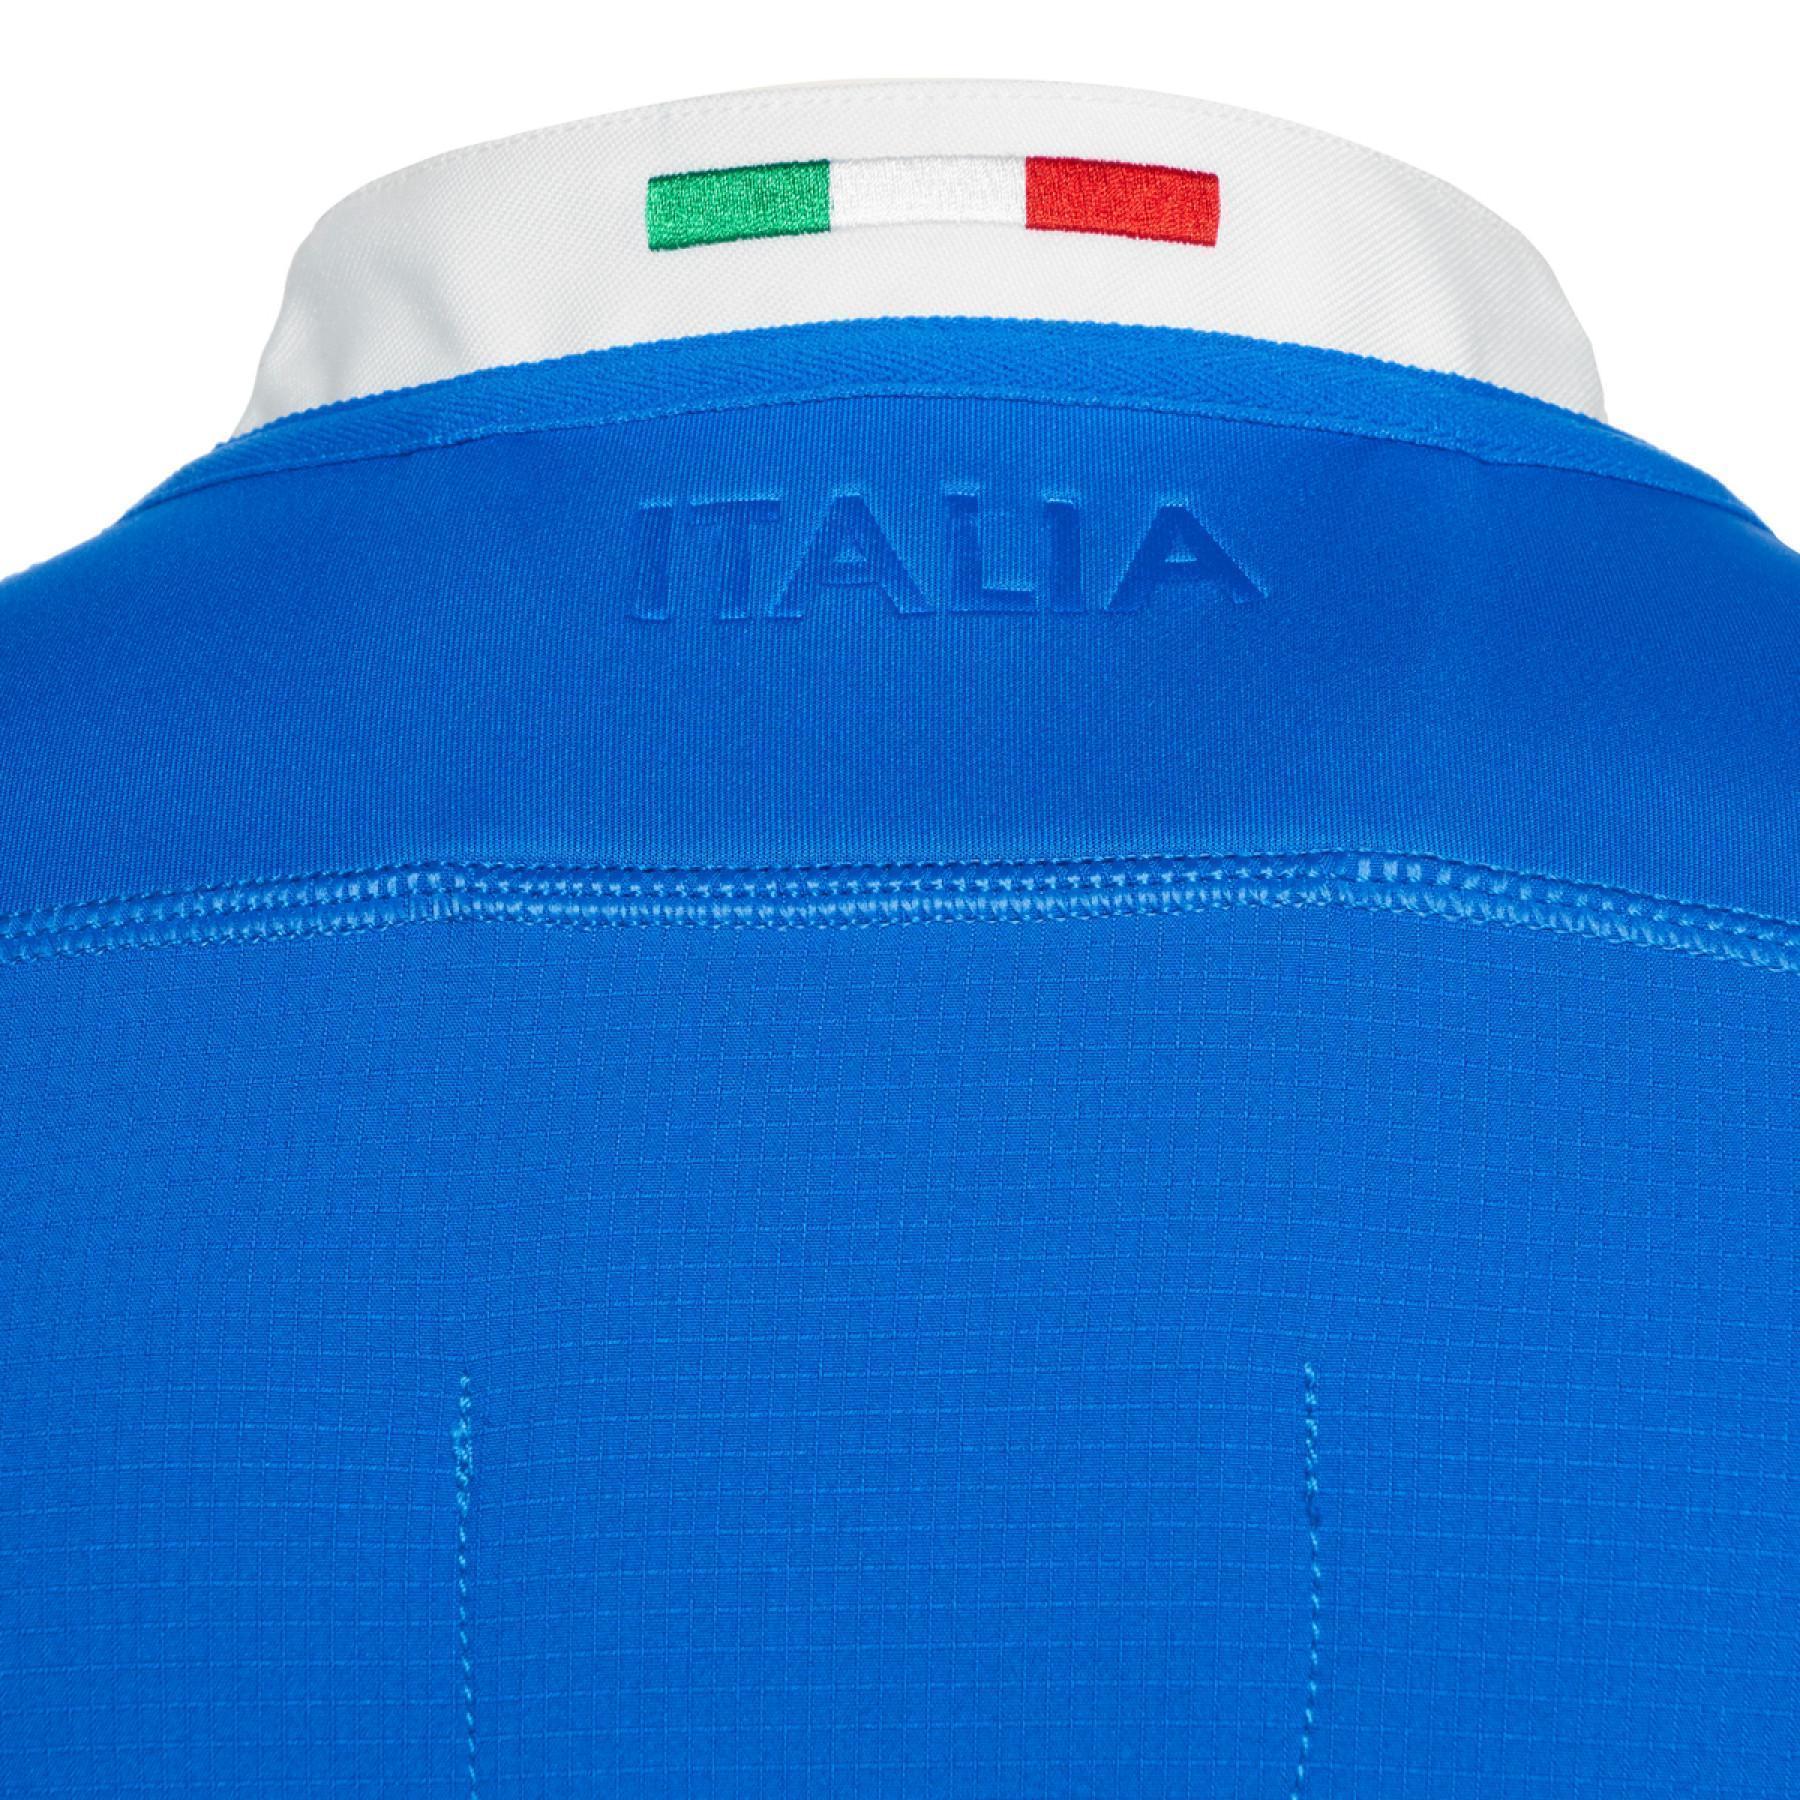 Jersey Italie rugby authentique 2018